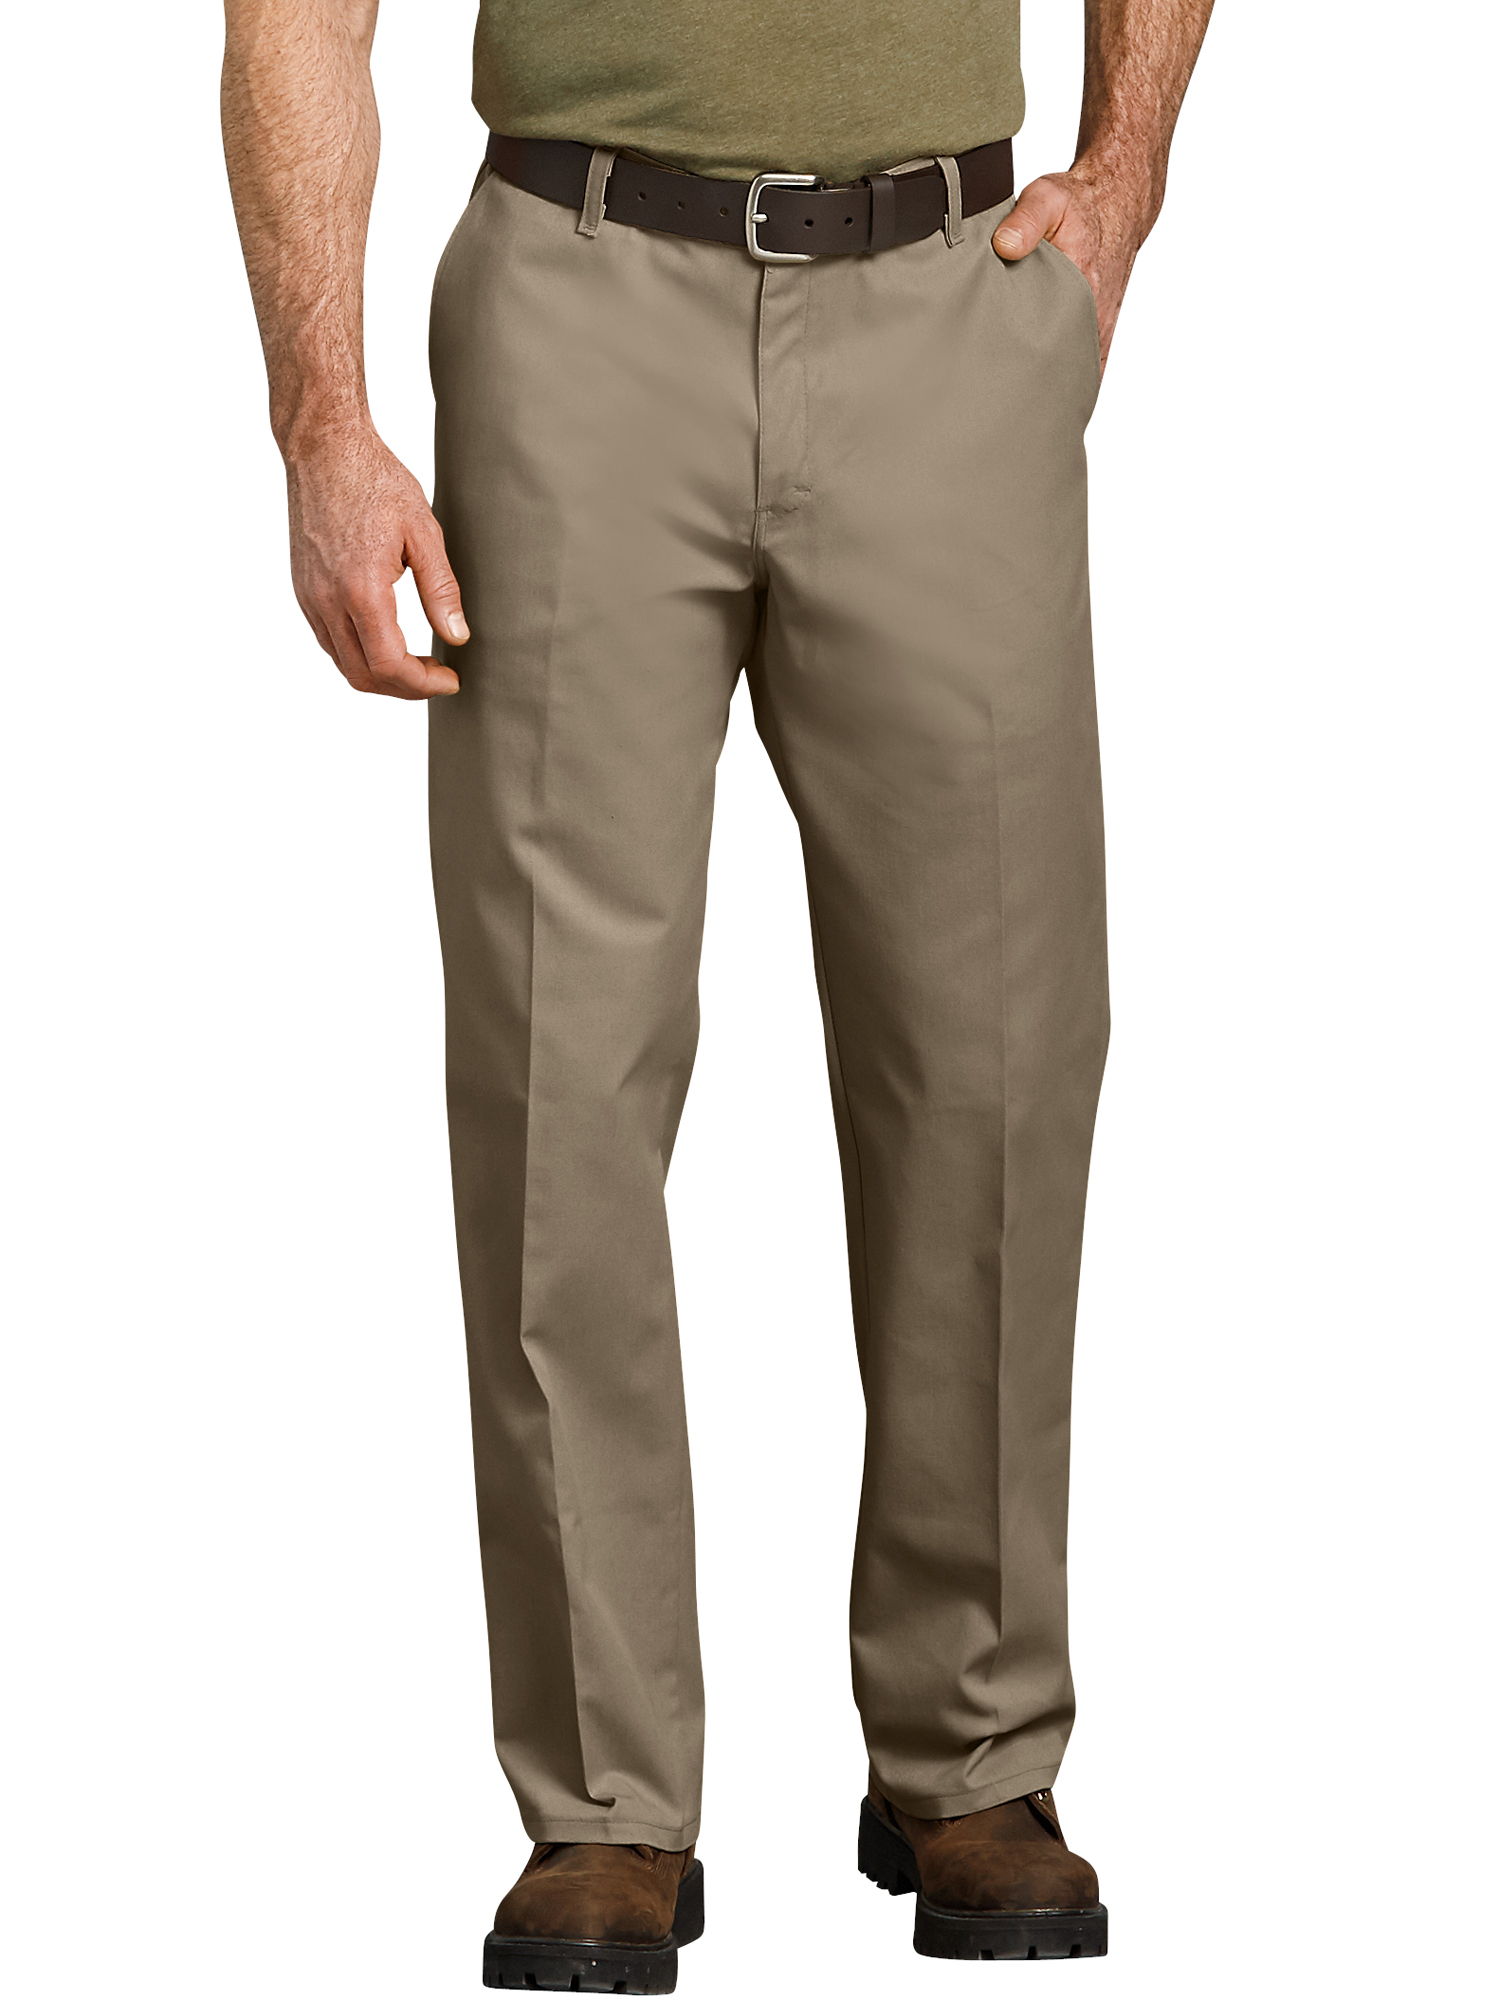 Genuine Dickies Mens Relaxed Fit Straight Leg Flat Front Flex Pant - image 1 of 2